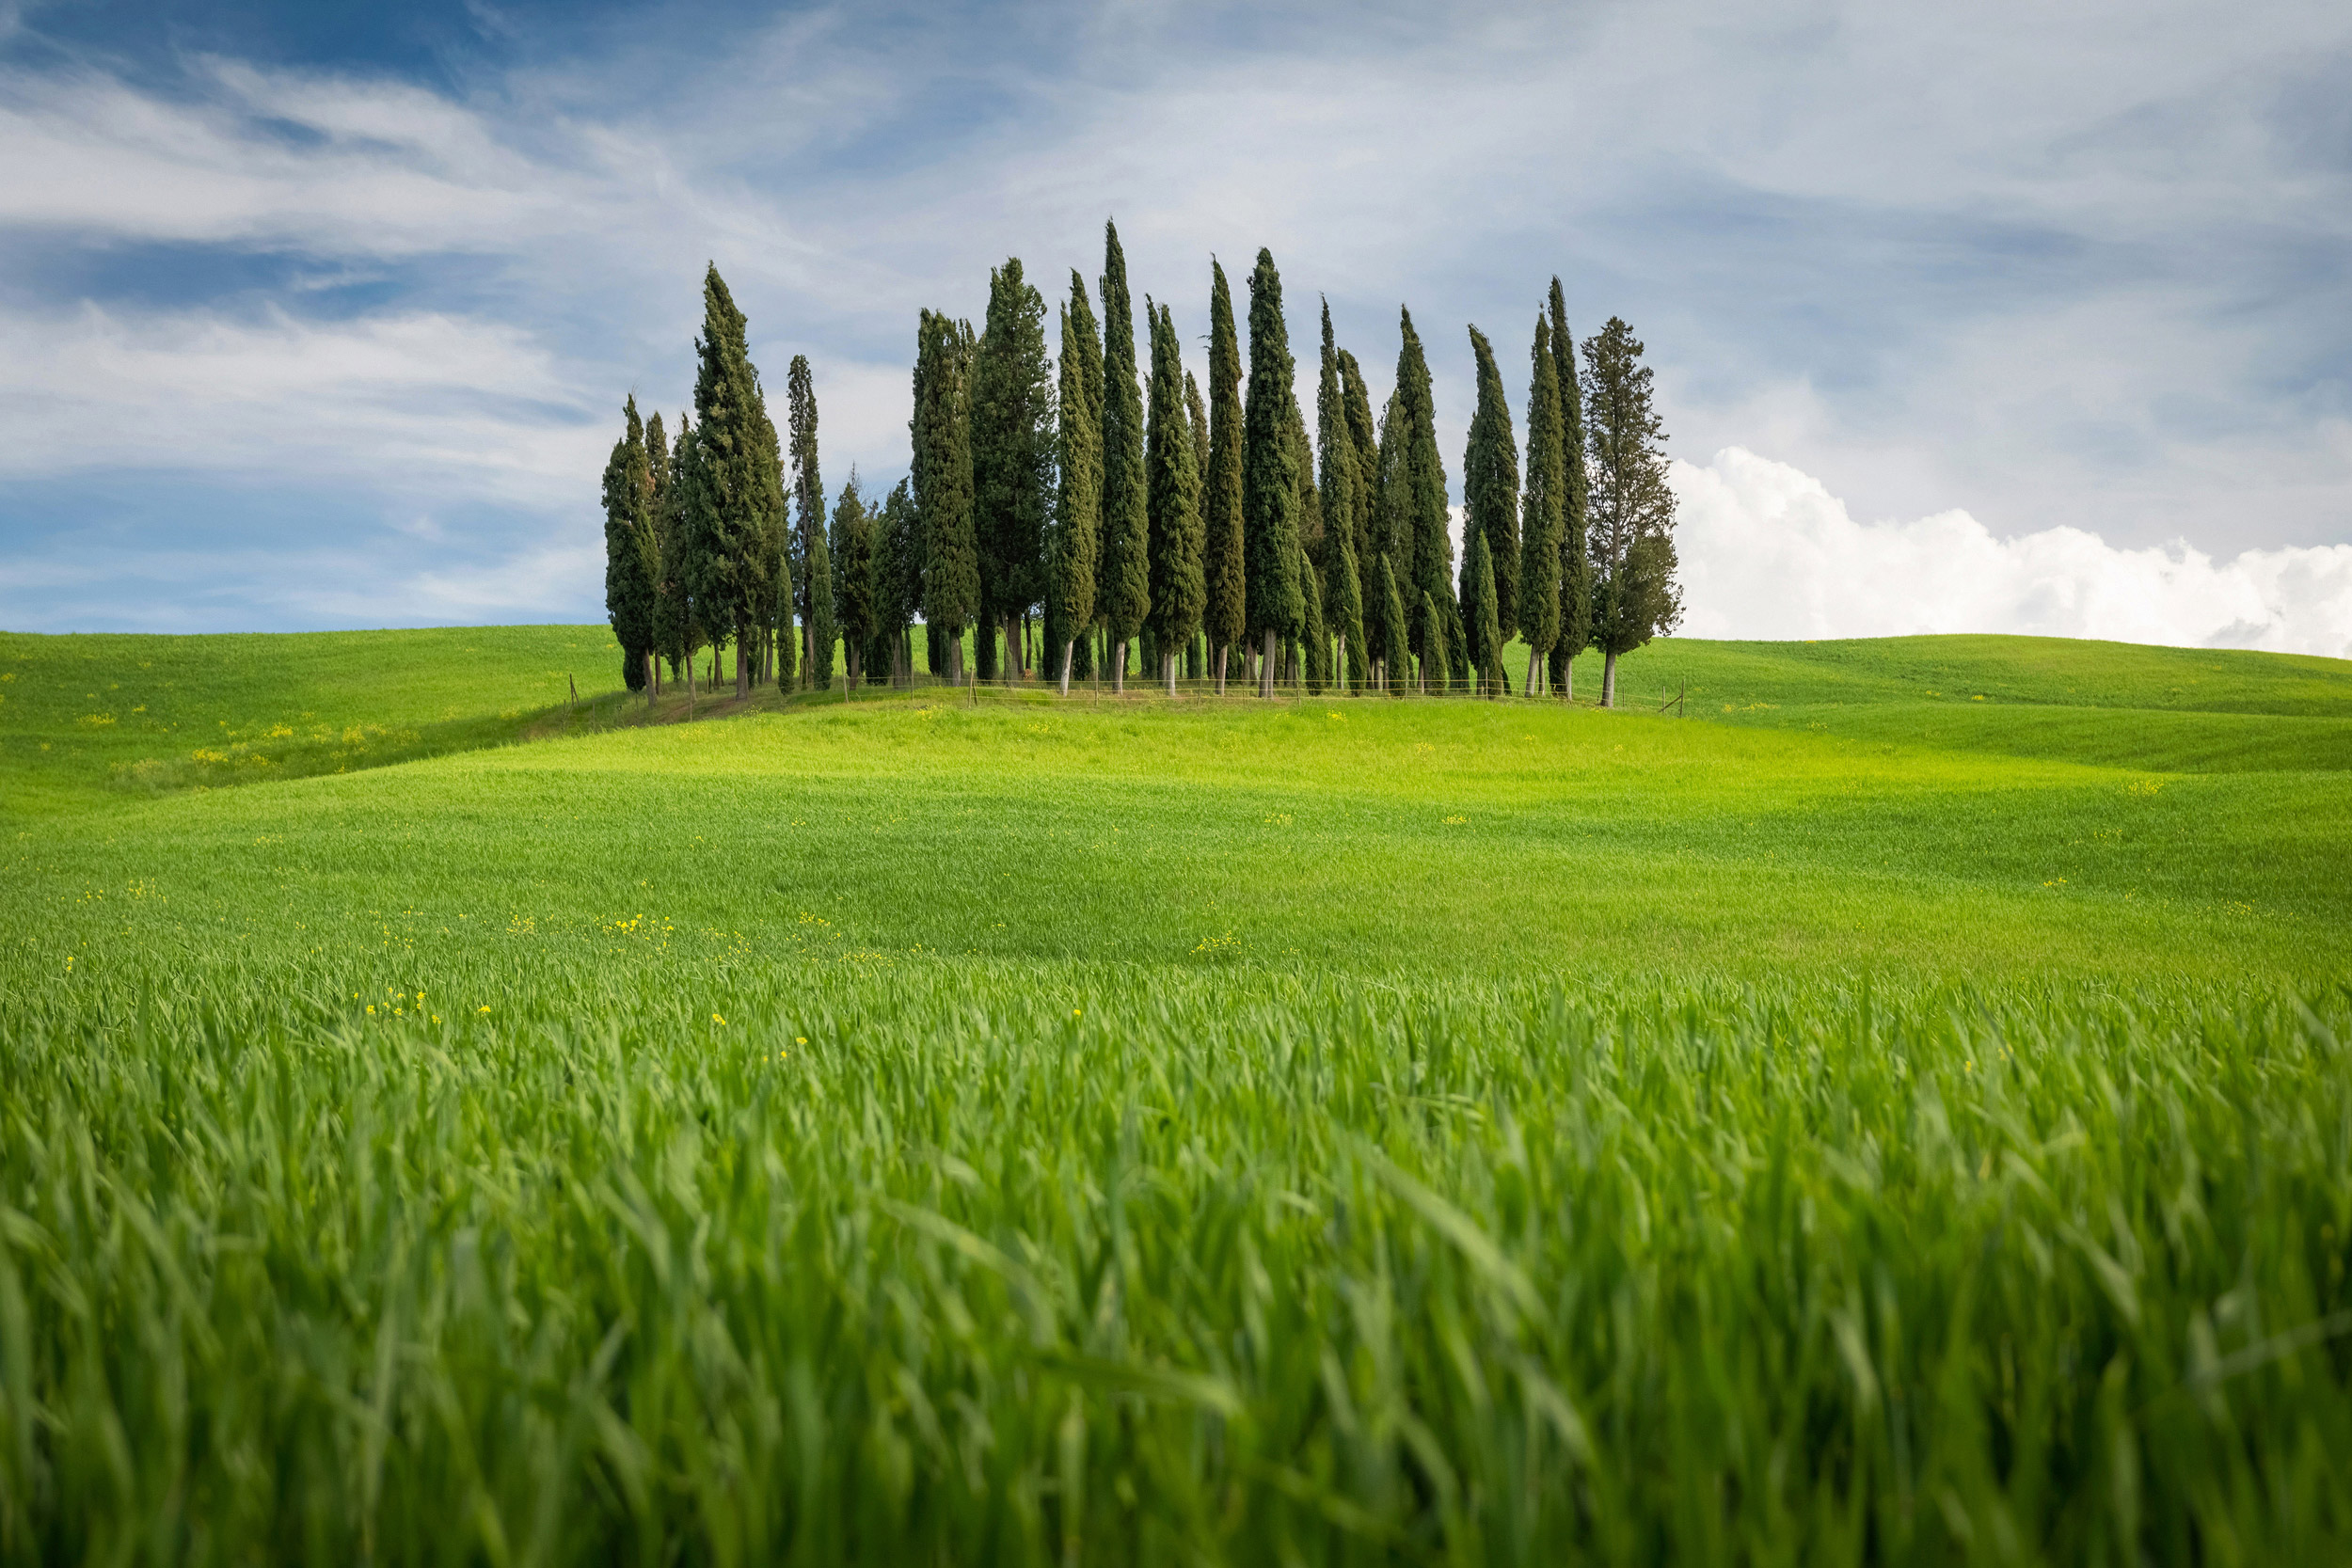 A group of Mediterranean Cypress trees on a picturesque afternoo